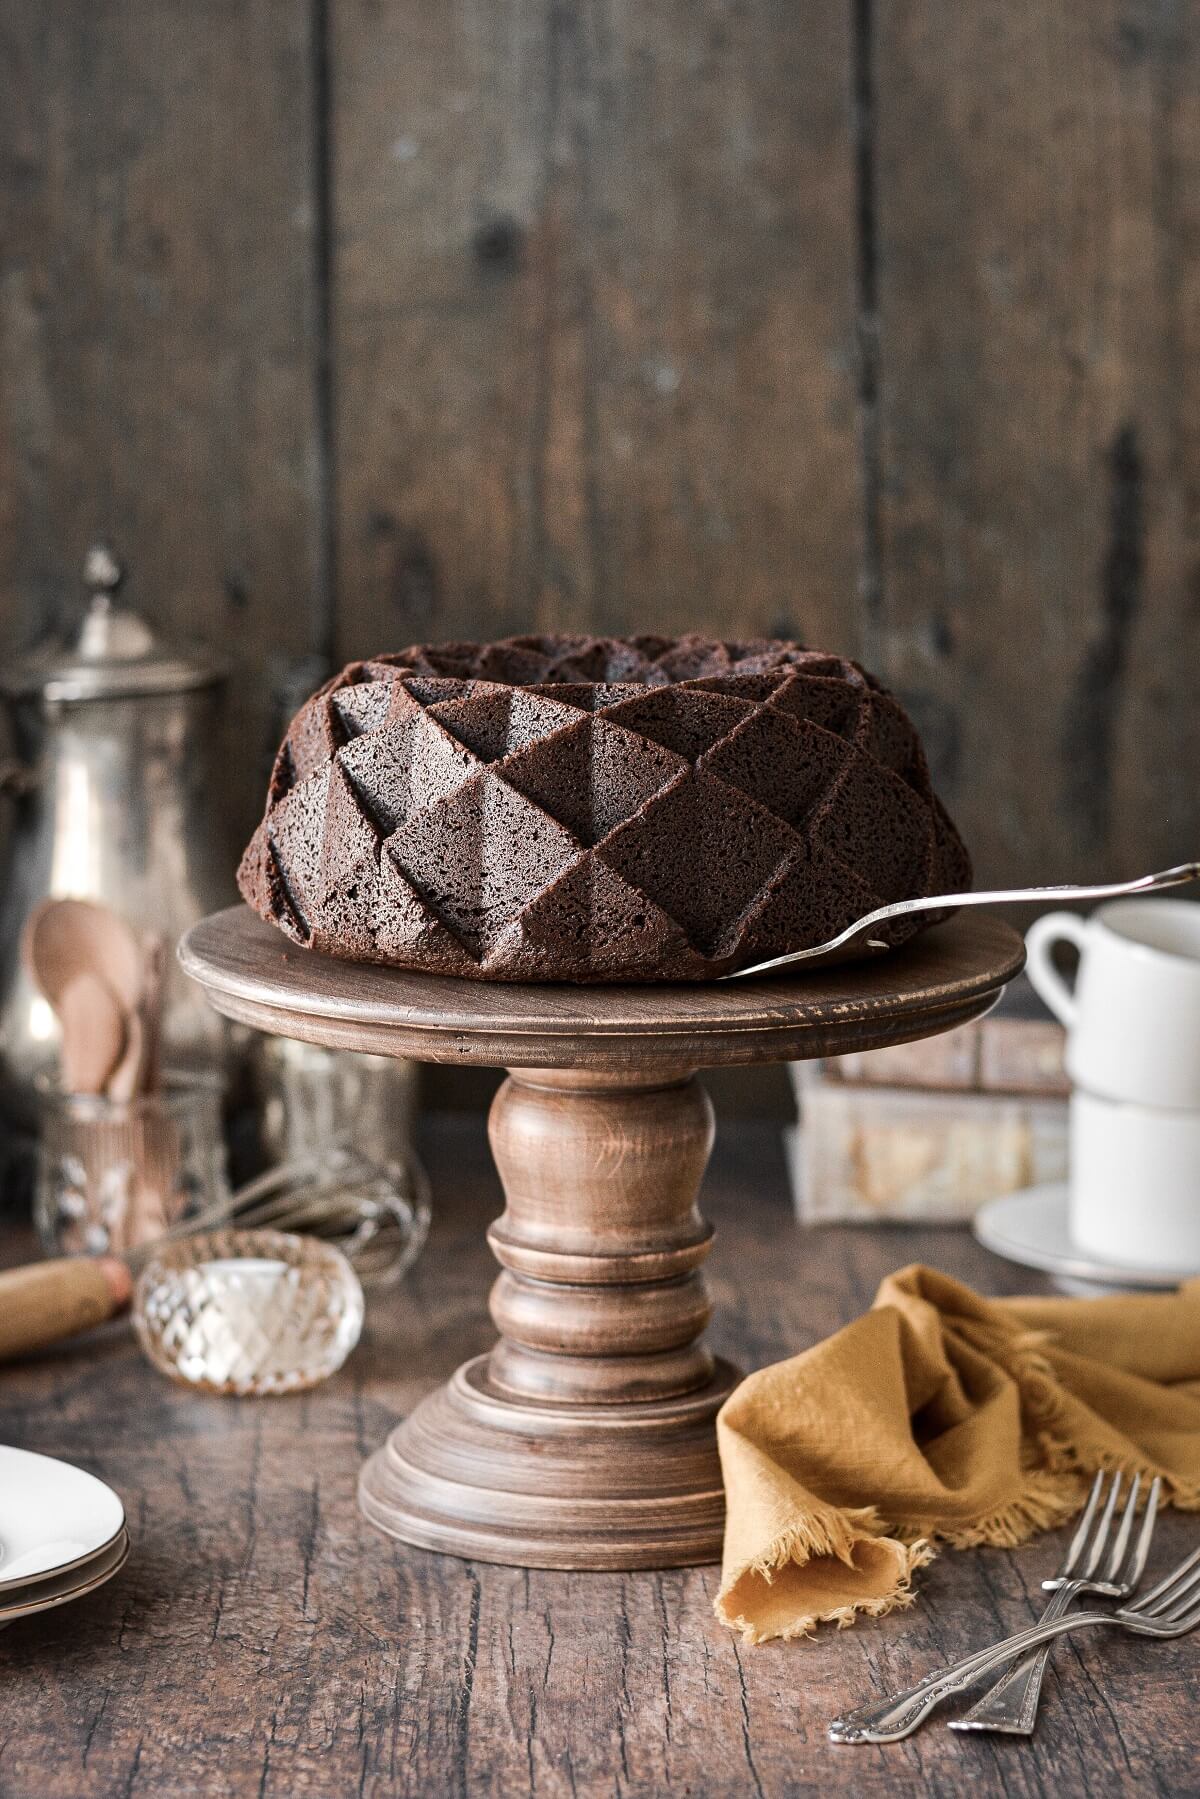 A chocolate bundt cake on a wooden cake stand.